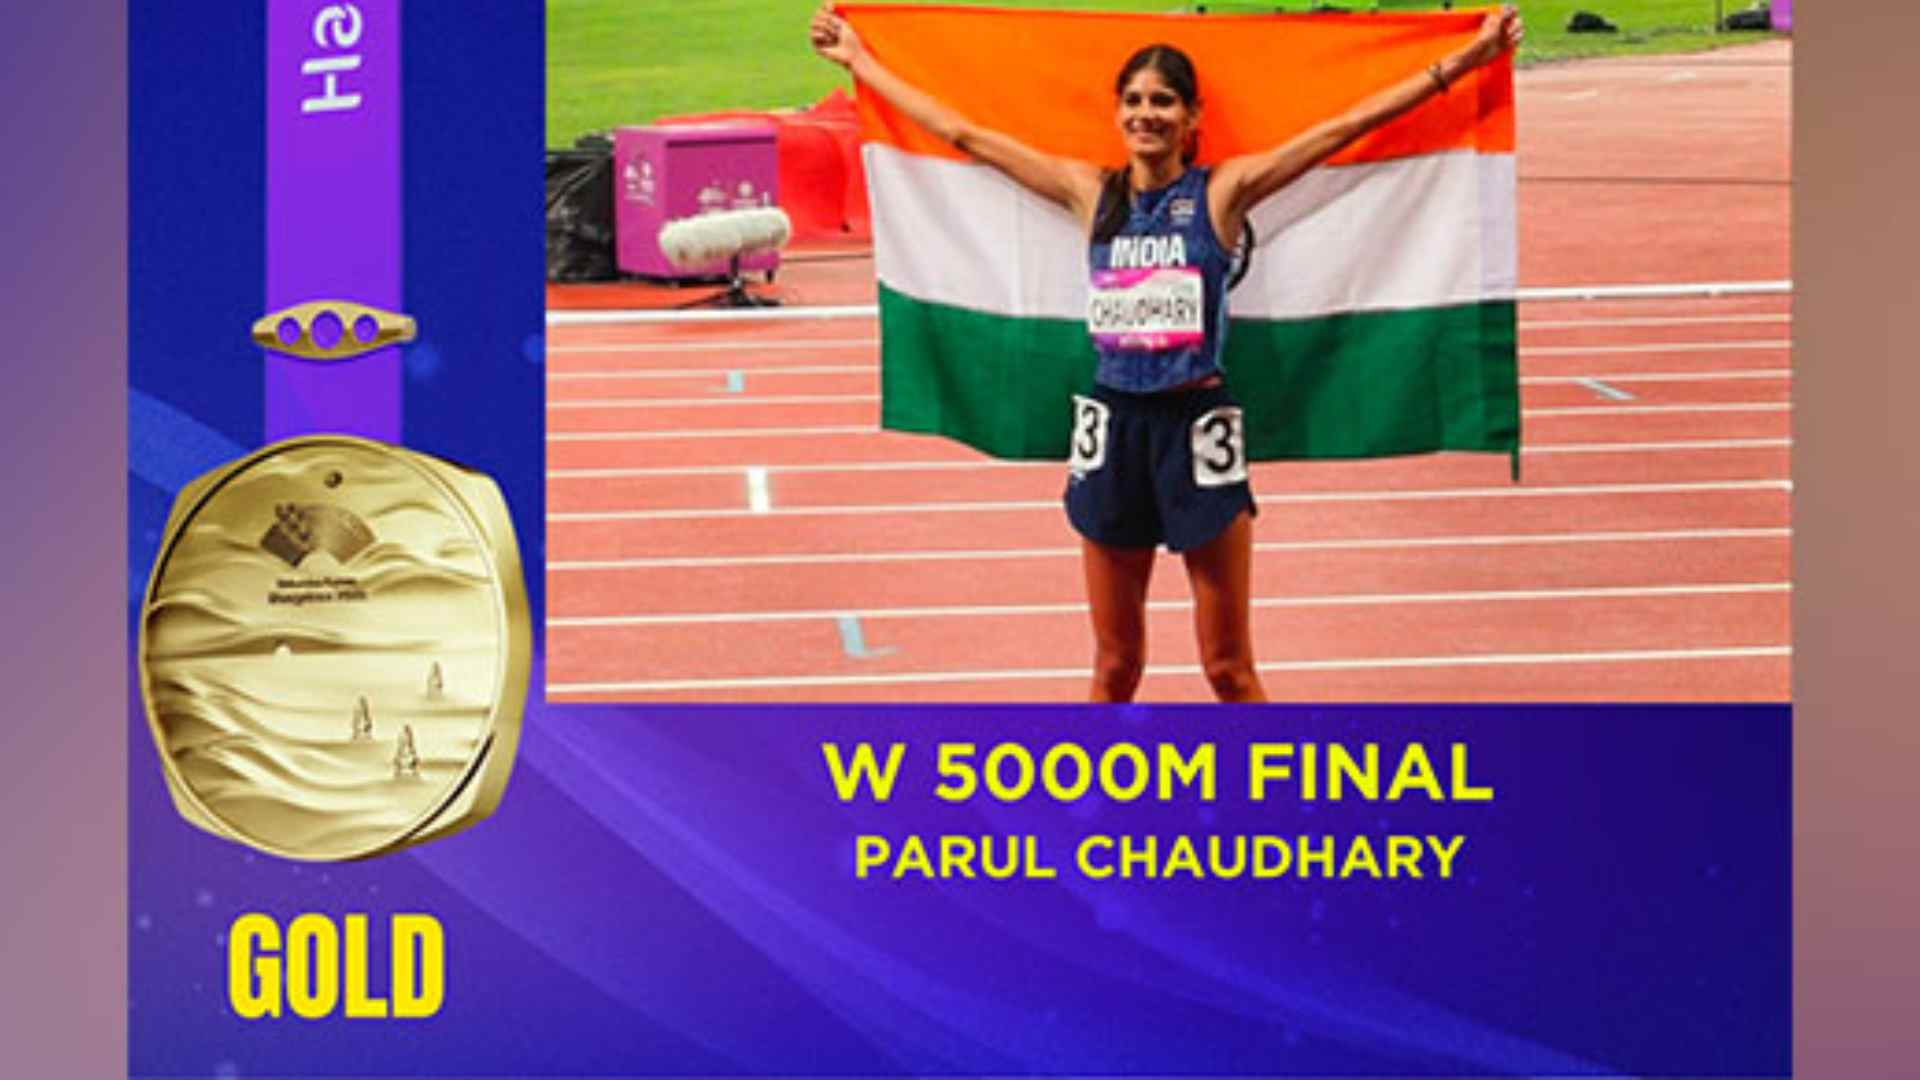 India's Parul Chaudhary Secures Gold Medal in Women's 5000-Meter Race at Hangzhou Asian Games